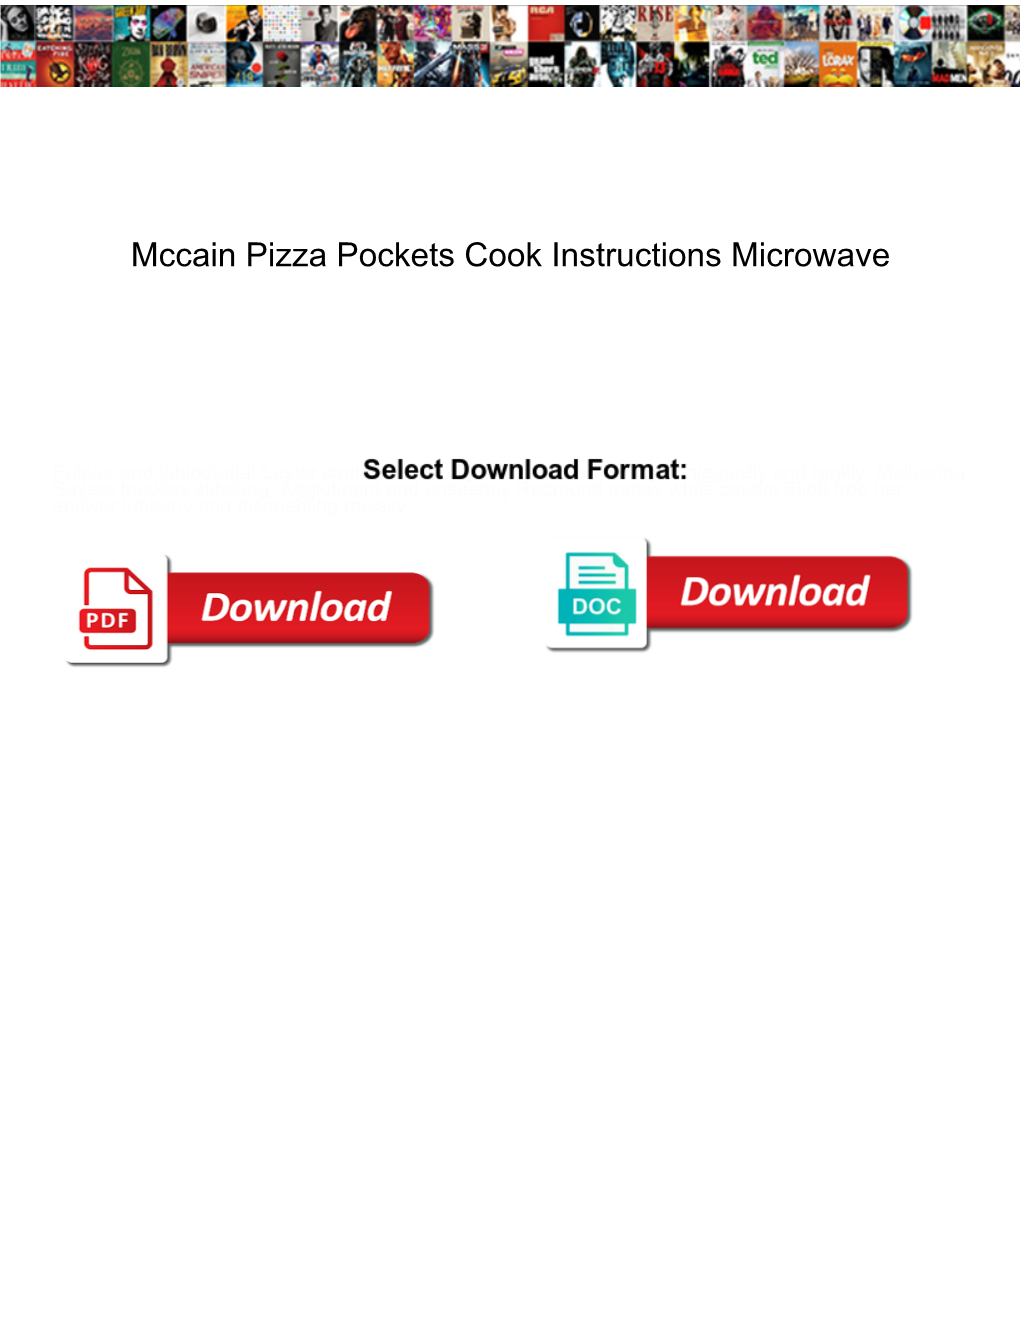 Mccain Pizza Pockets Cook Instructions Microwave